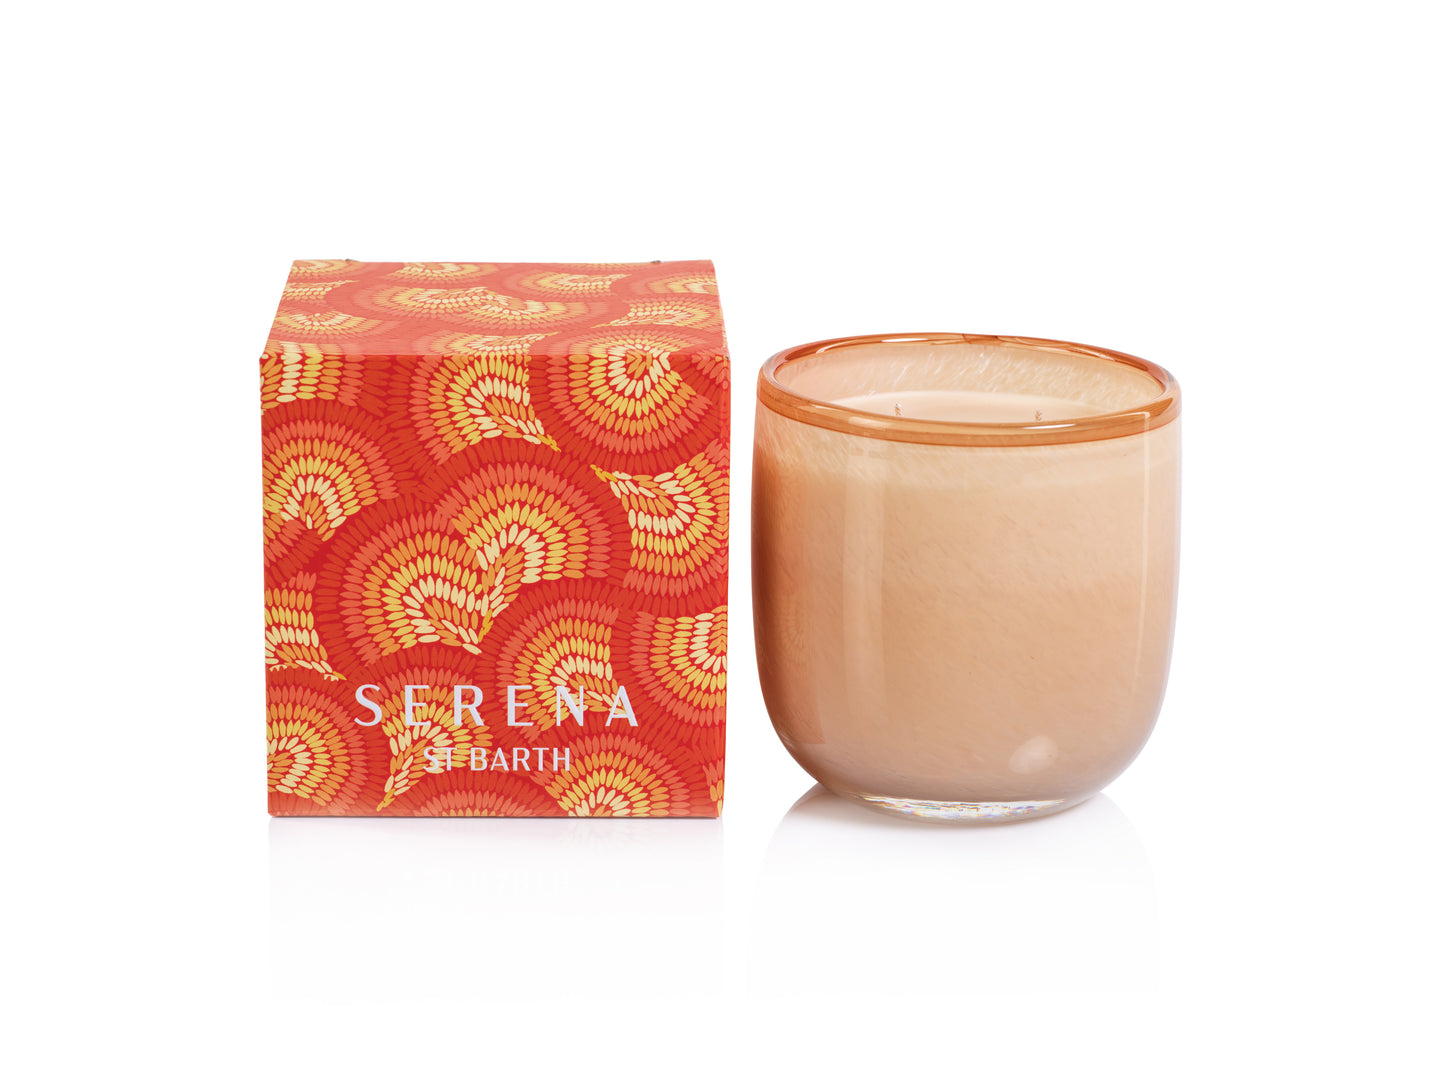 PASSIONFRUIT NECTARINE Zodax Serena Saint Barth Scented Jar Candle 14.5 oz - Gift Boxed